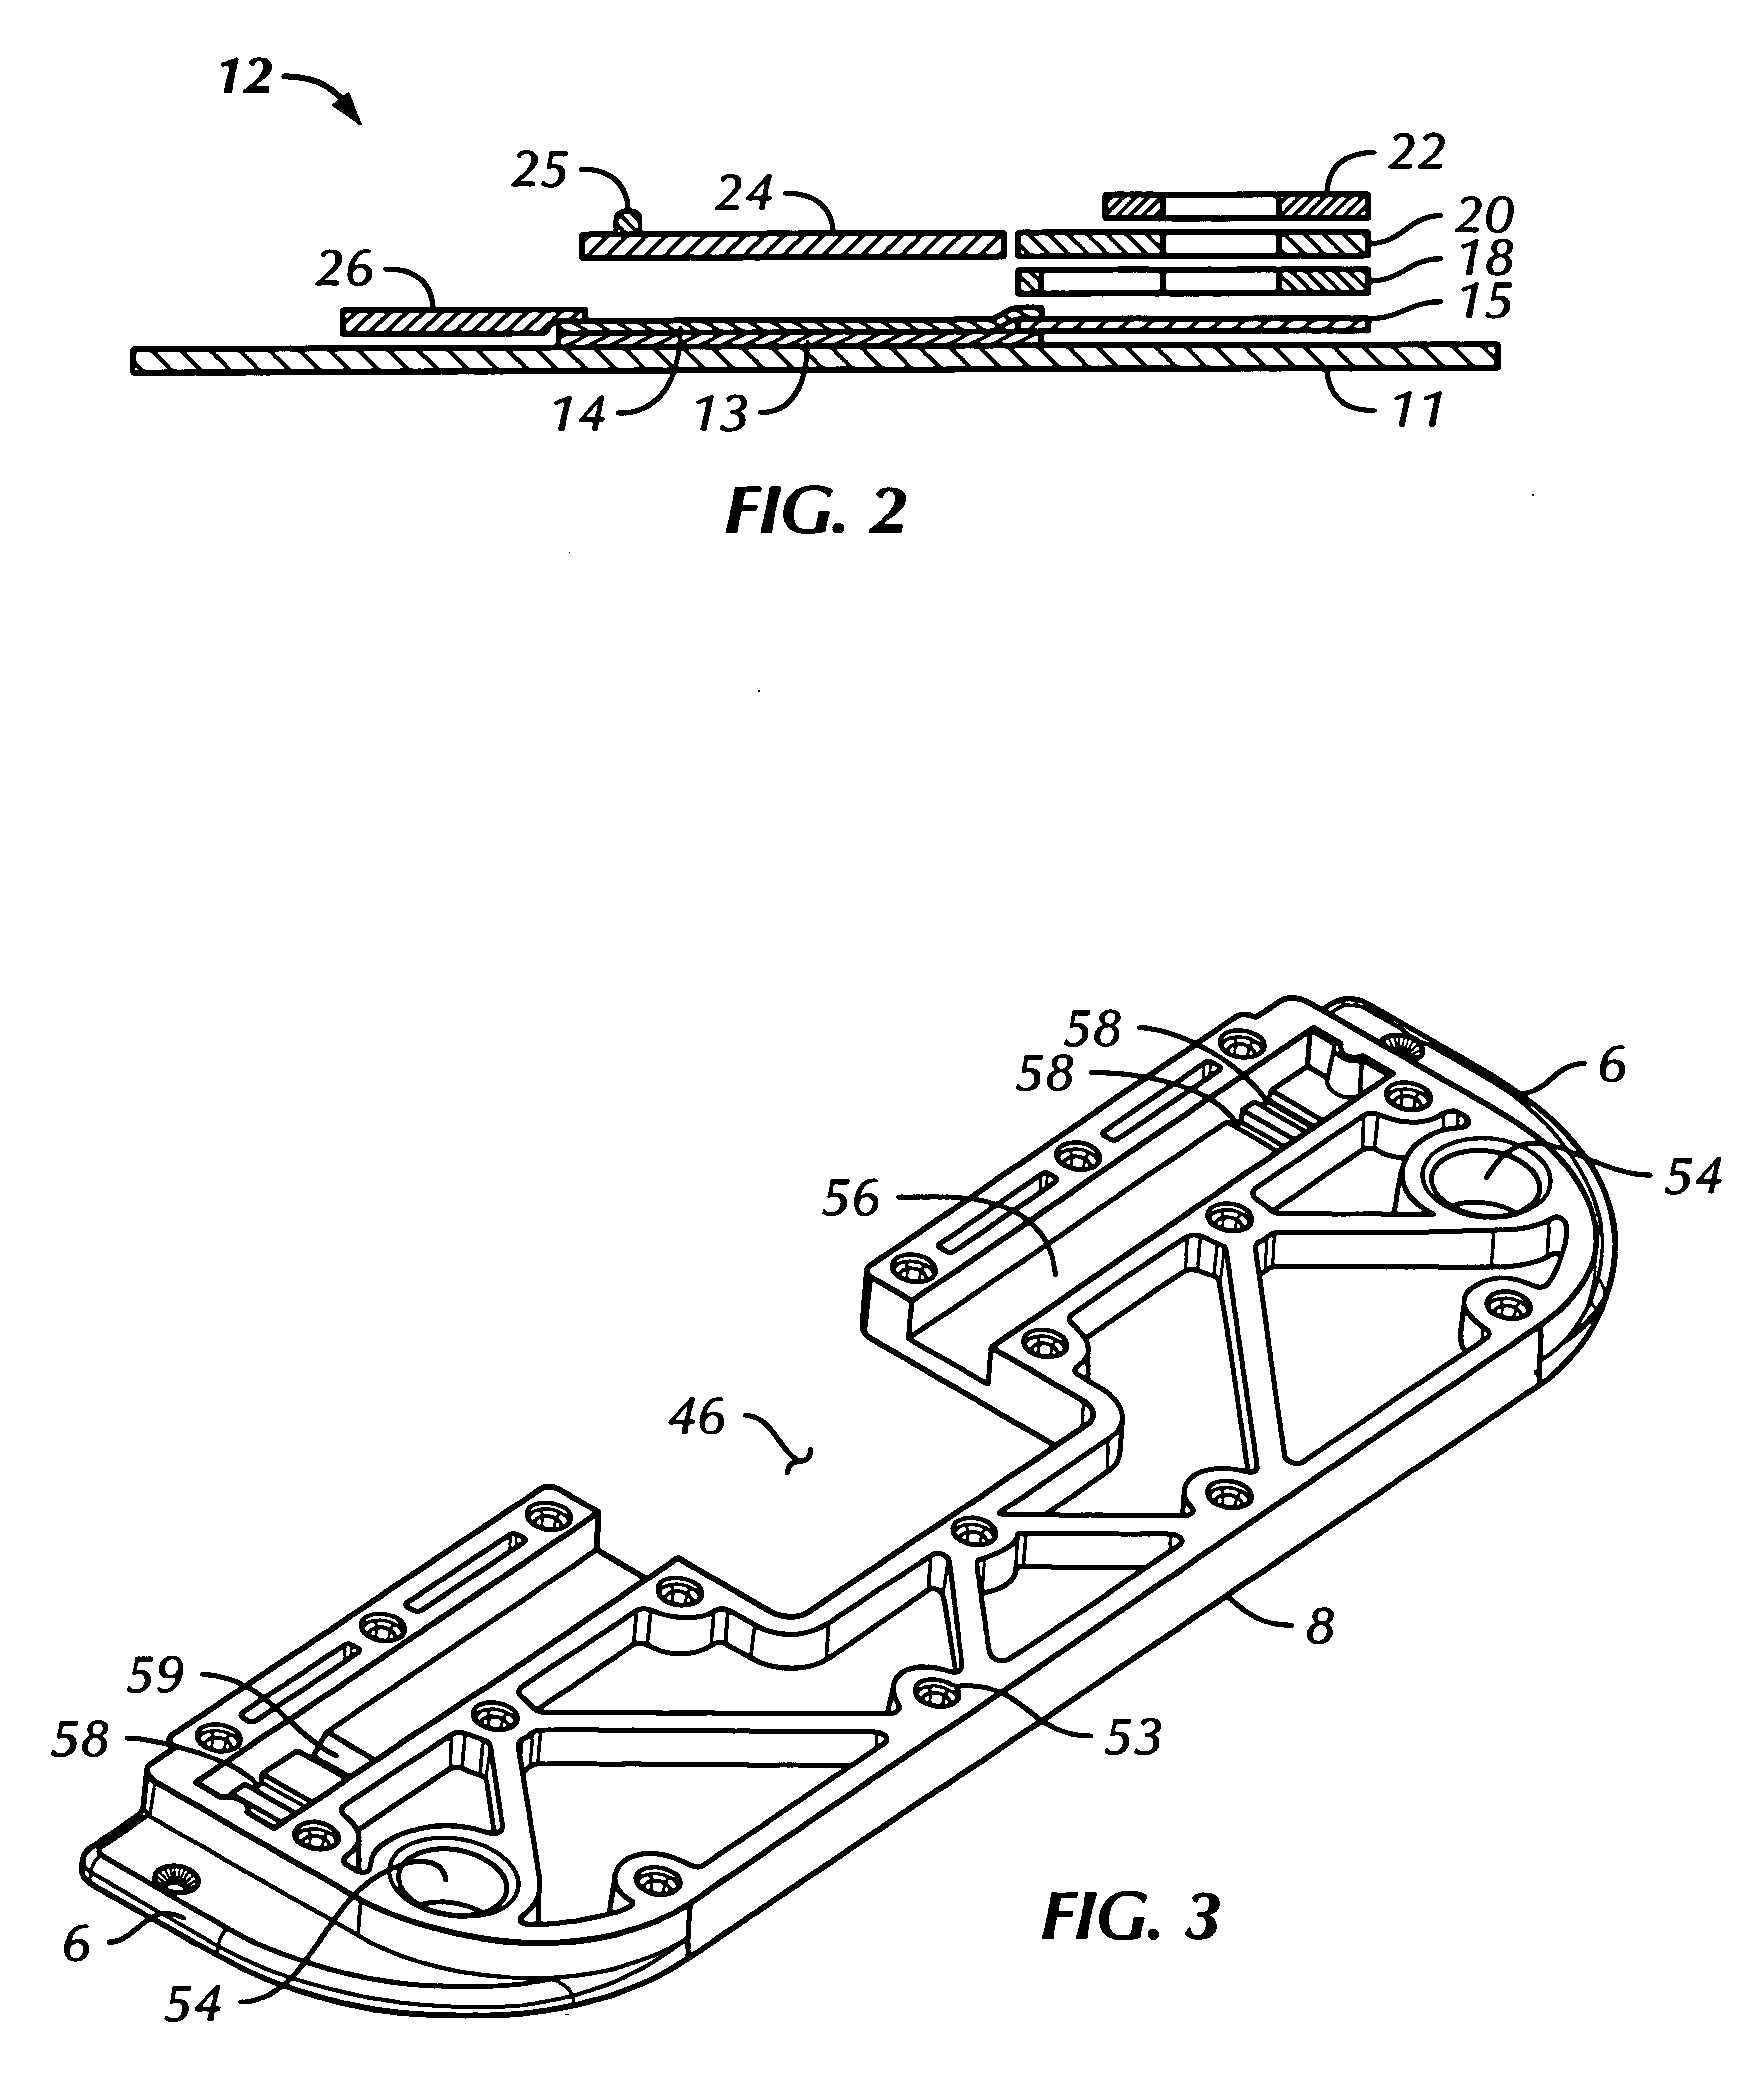 Directed-flow assay device